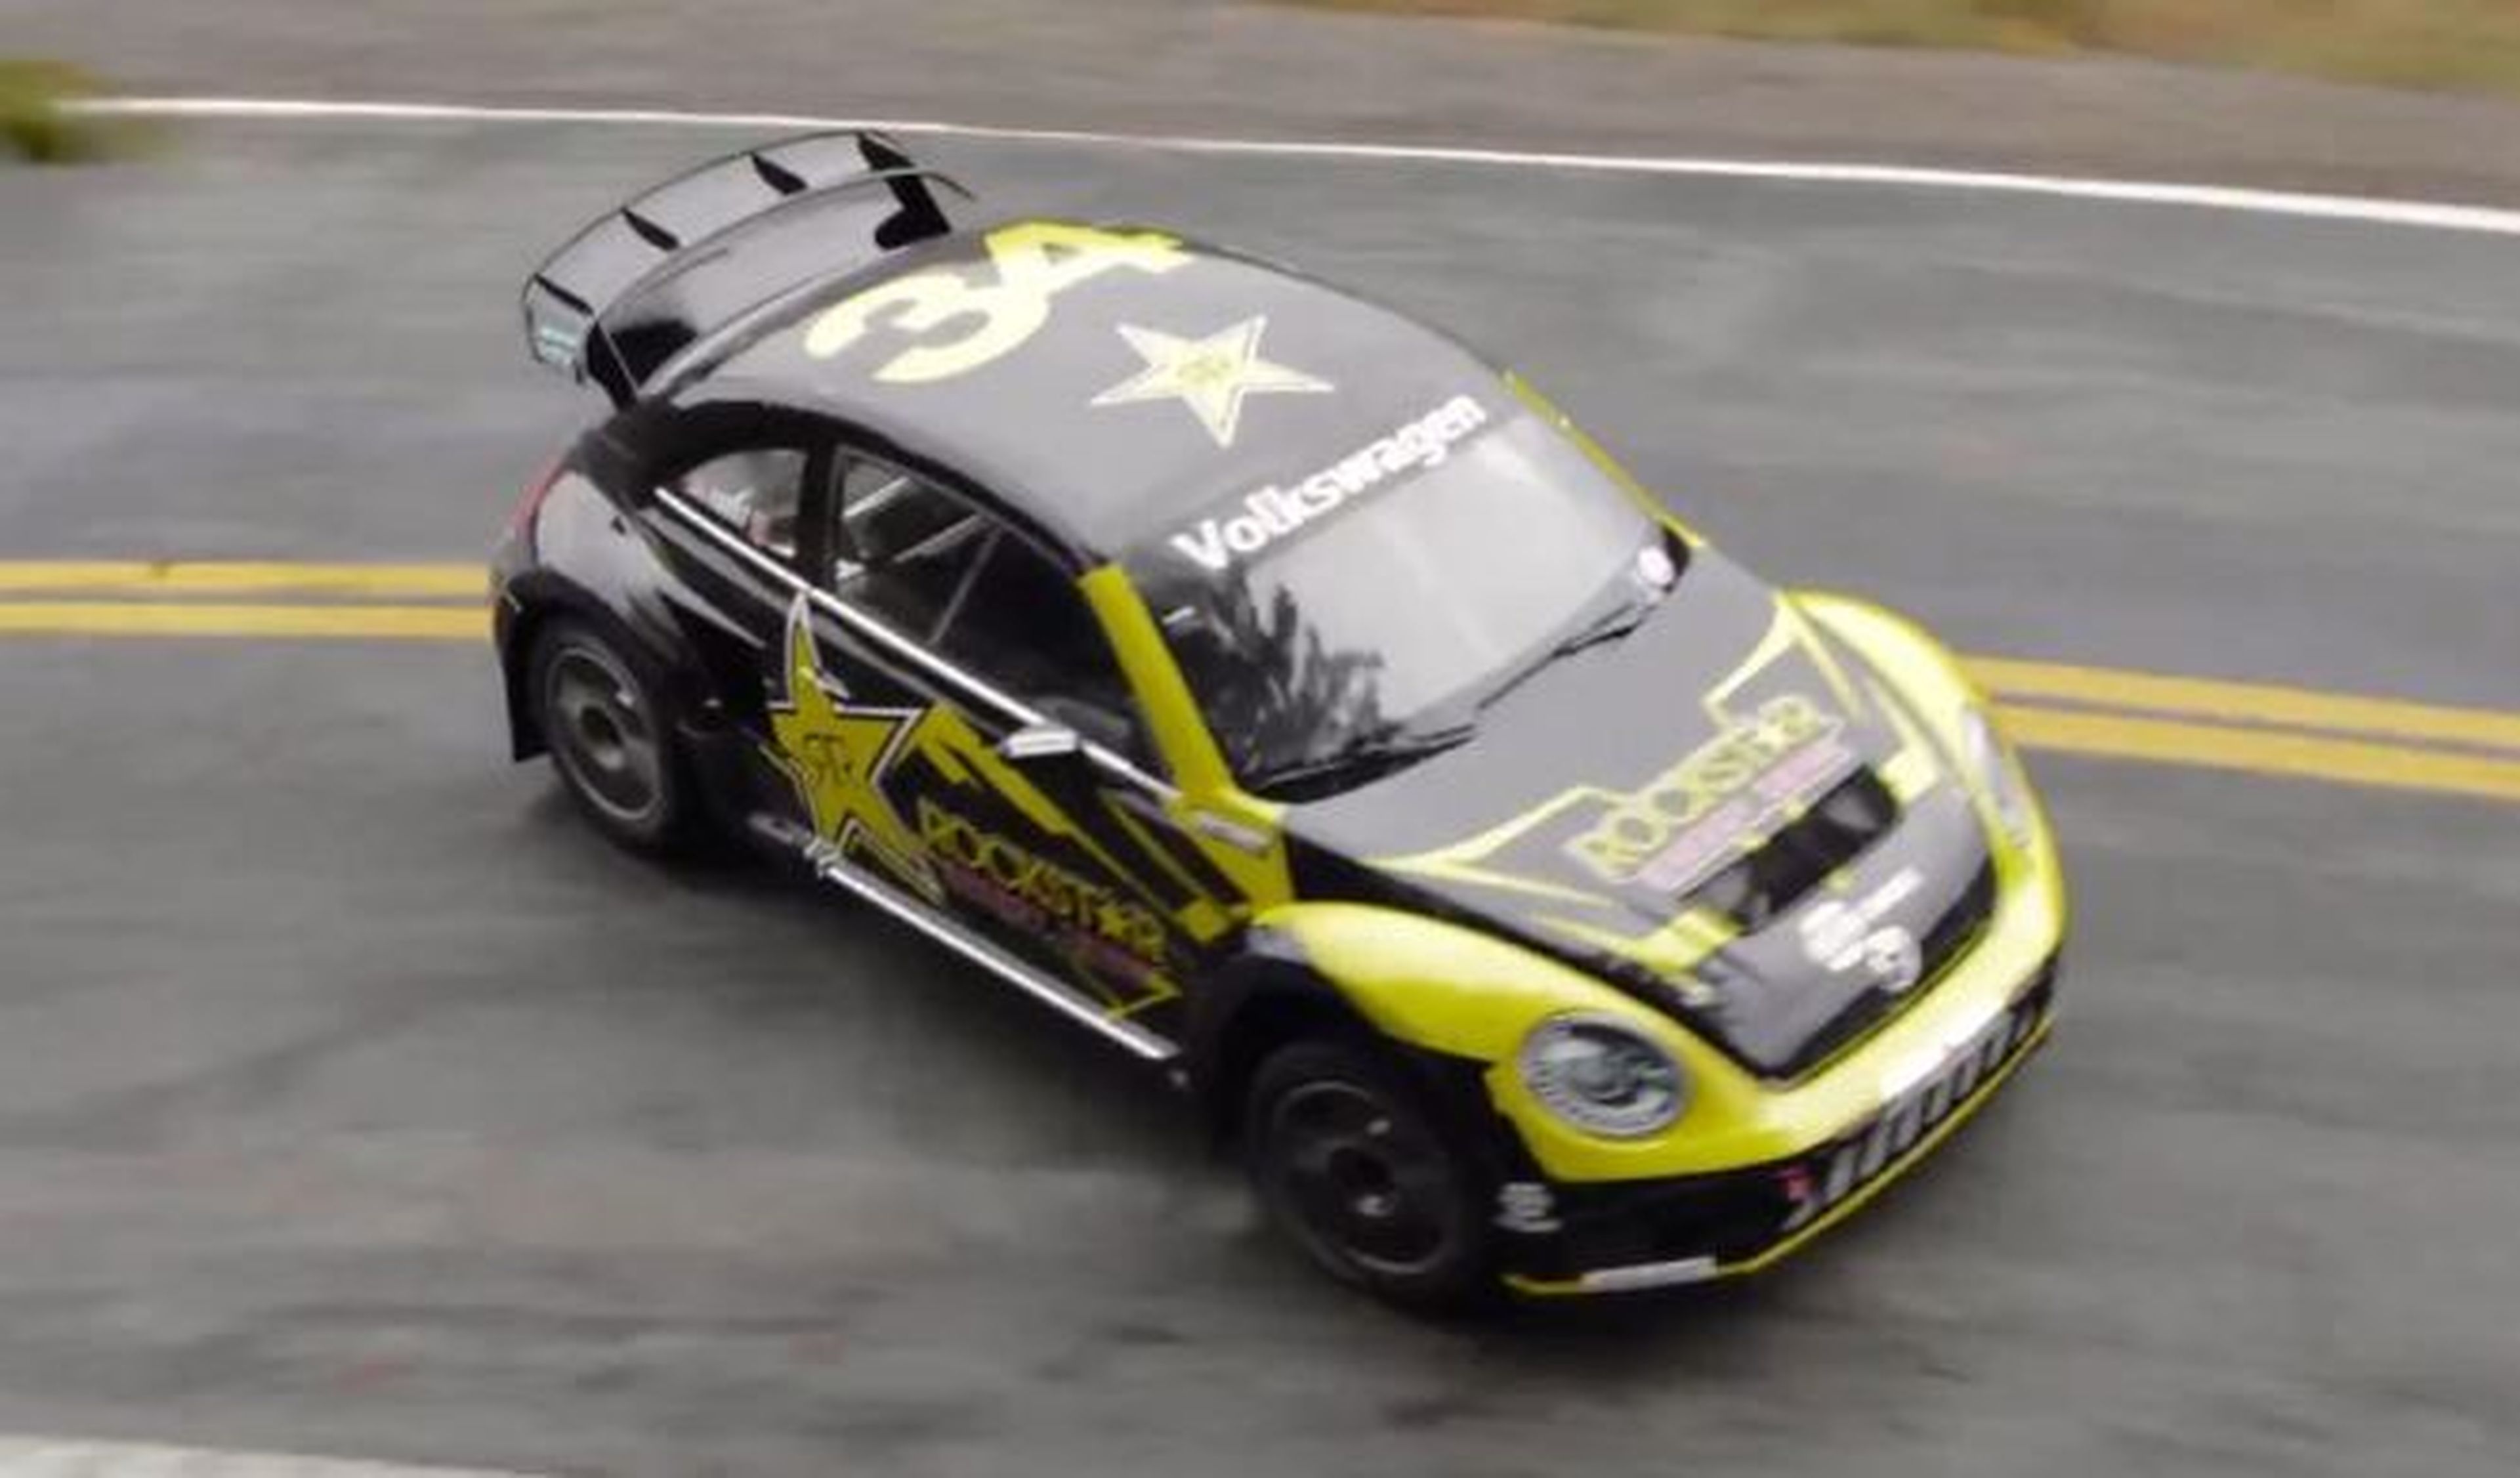 Vídeo: Tanner Foust hace drift con casi cualquier cosa